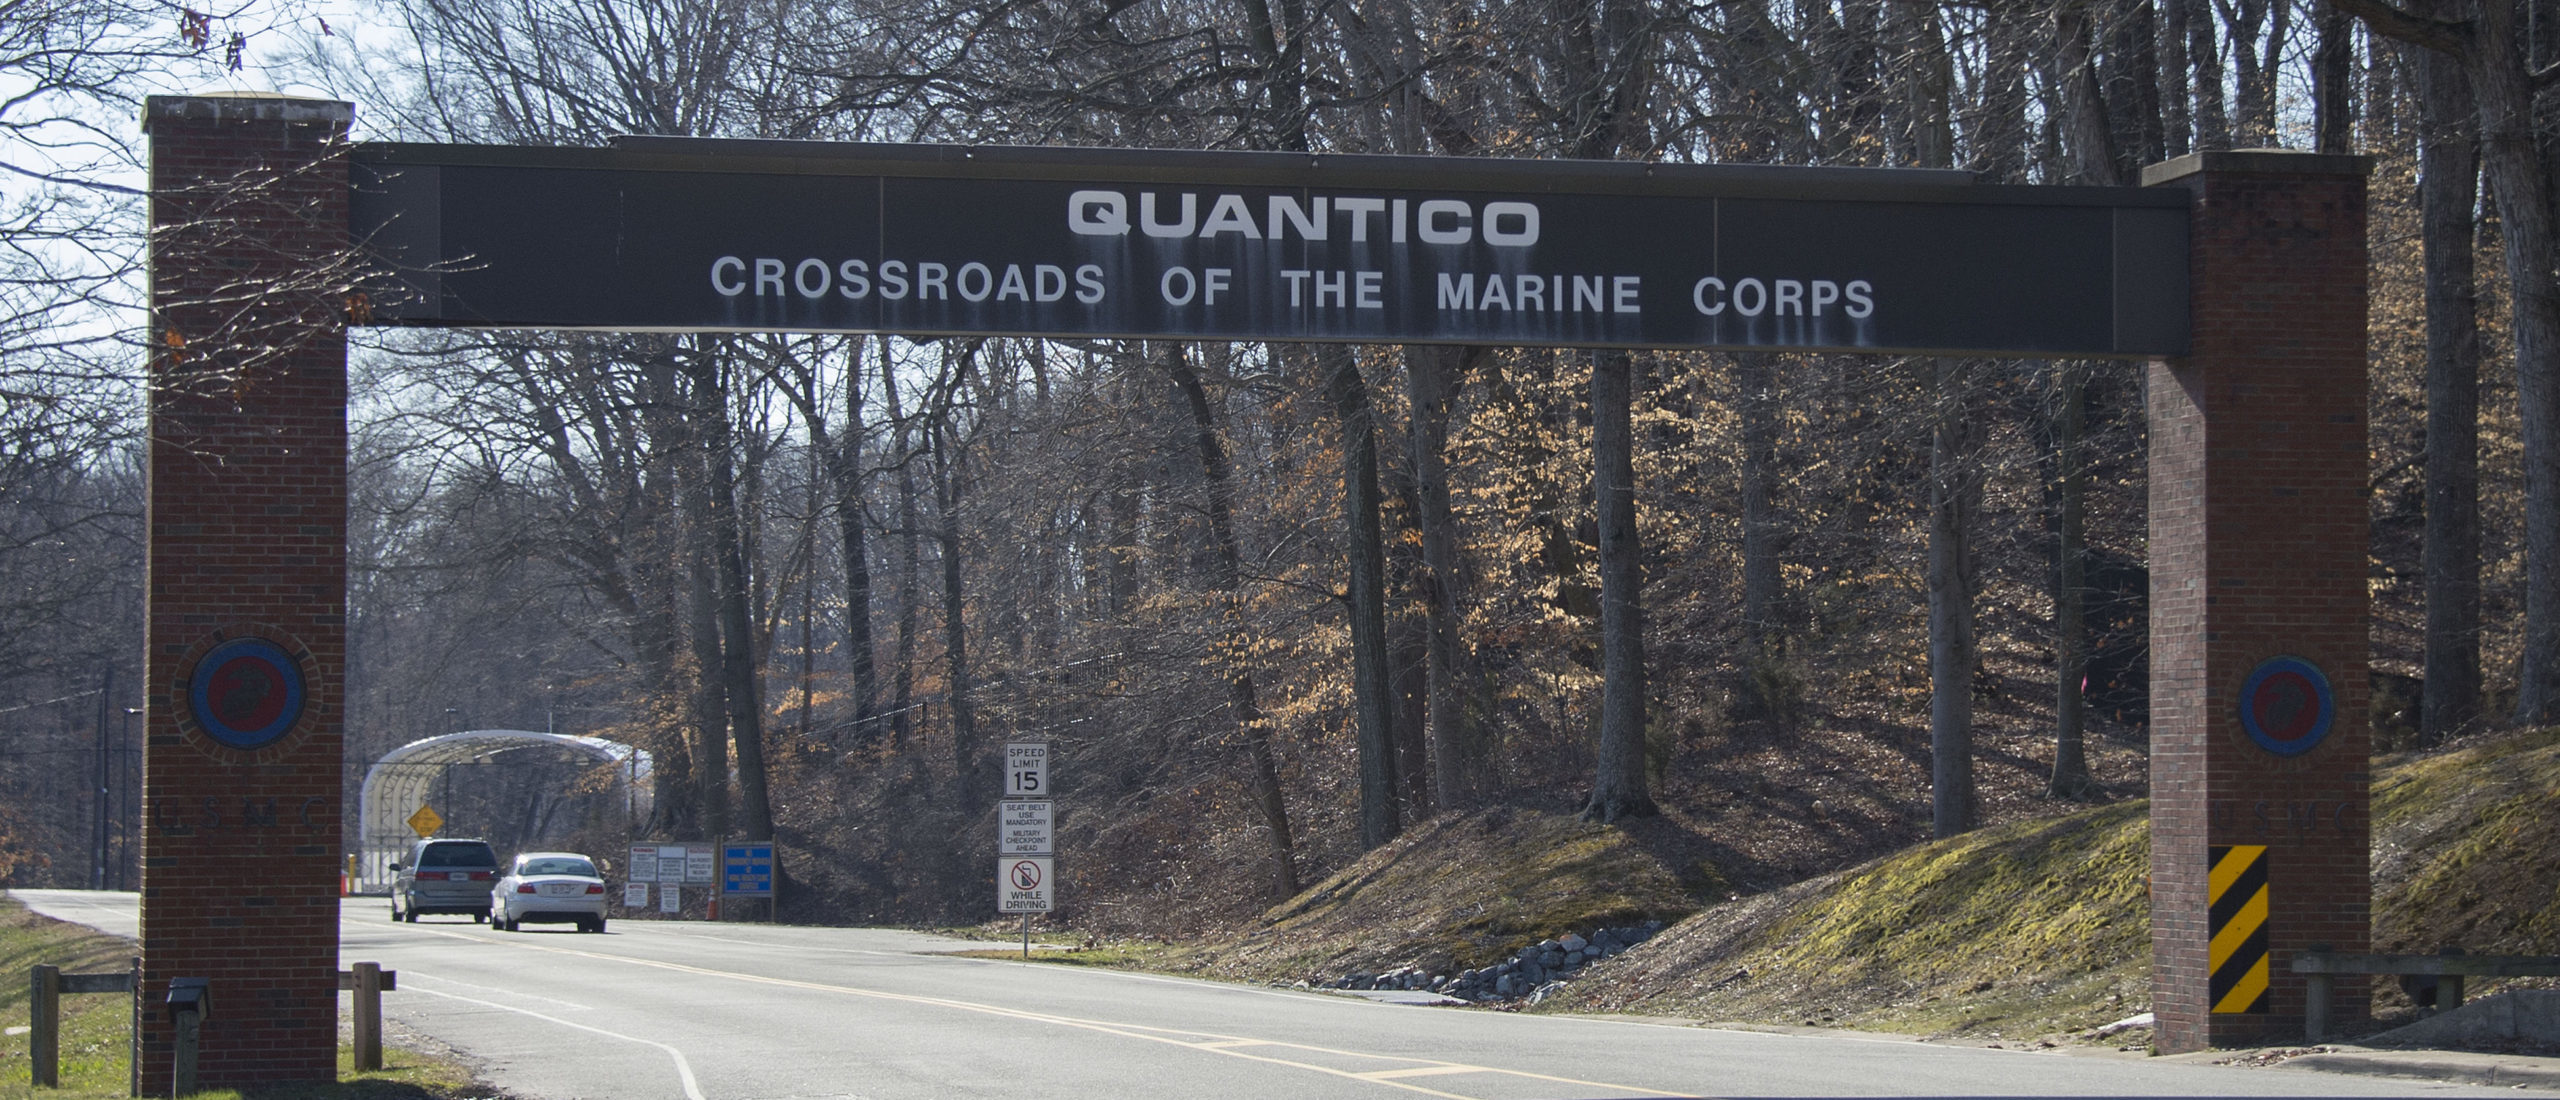 The main gate of the US Marine Corps Base in Quantico, Virginia, on March 22, 2013. A US Marine shot and killed two colleagues late March 21, 2013 before apparently turning the gun on himself at the base, the US Defense Department said on March 22. The suspected shooter and the victims were Marines who worked at an officer candidate school at the base, said base spokesman Sergeant Christopher Zahn.